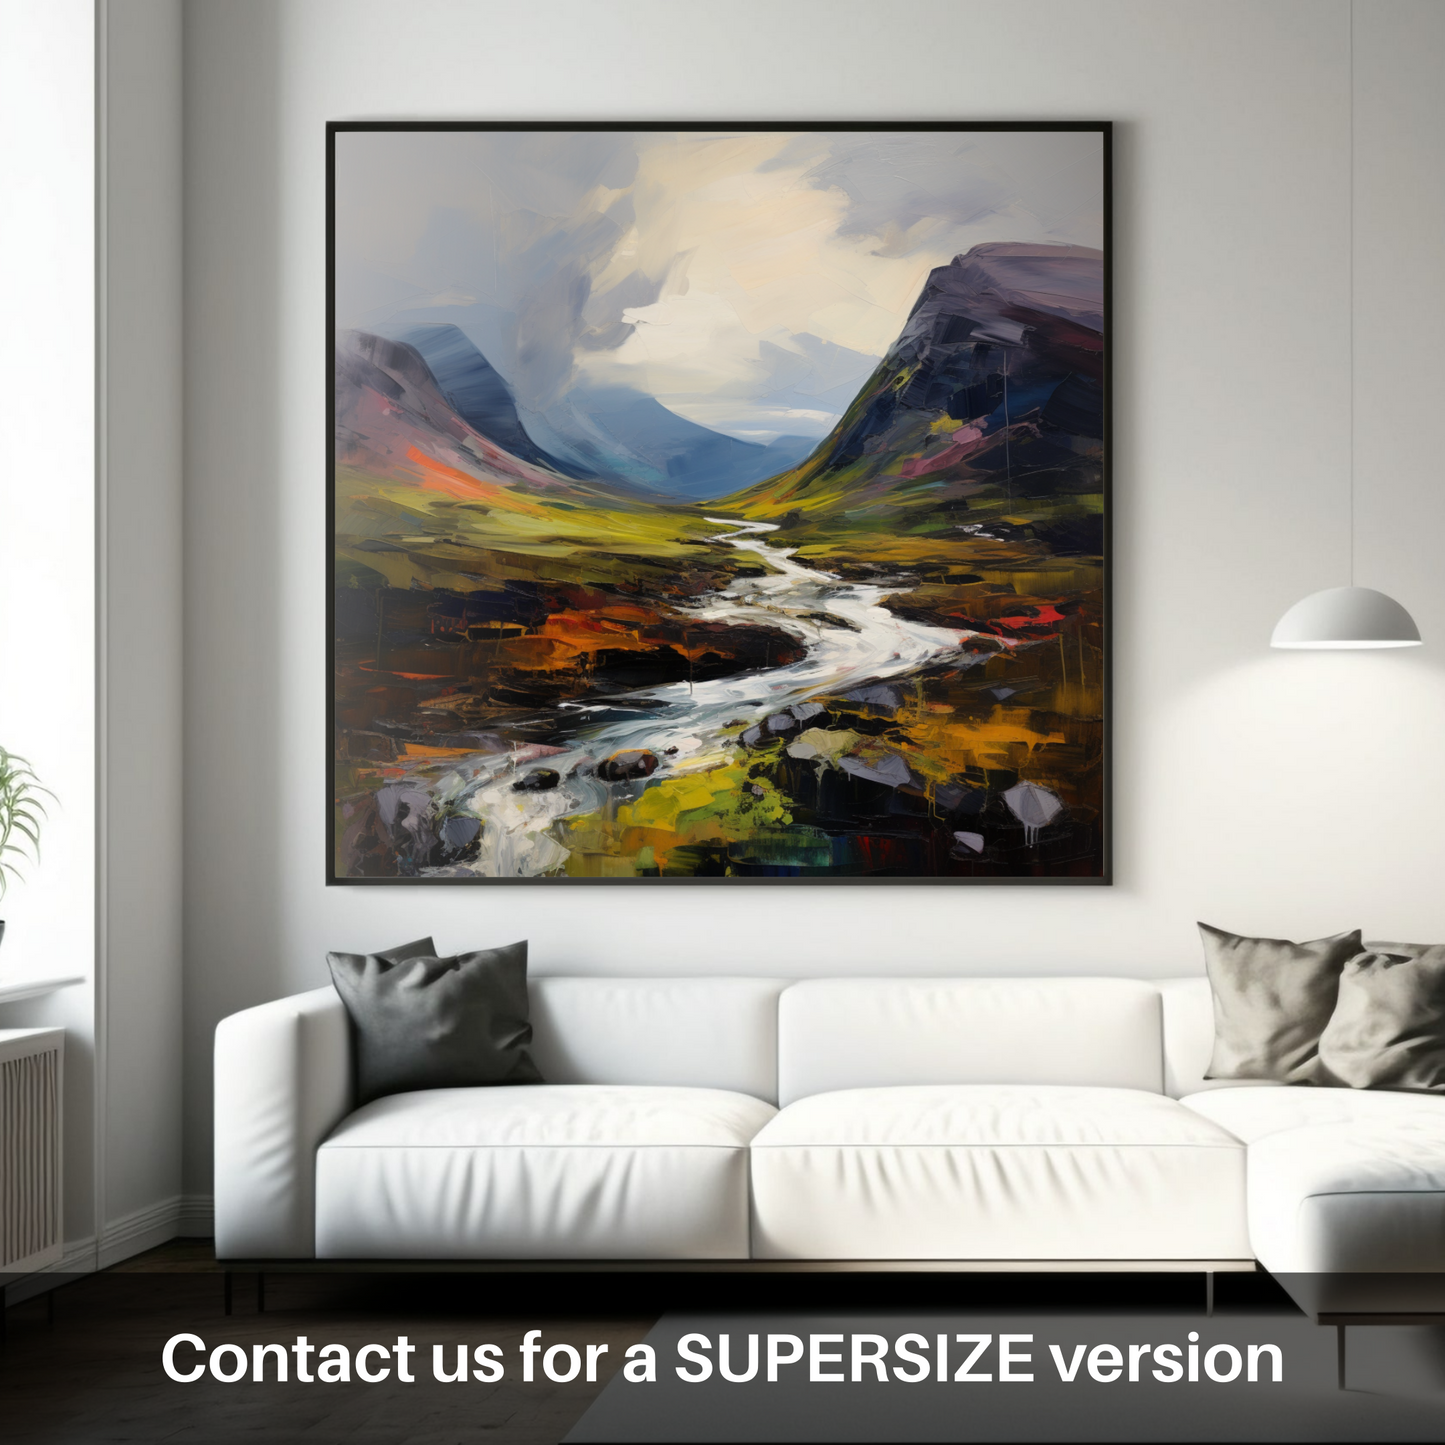 Huge supersize print of Meall Greigh